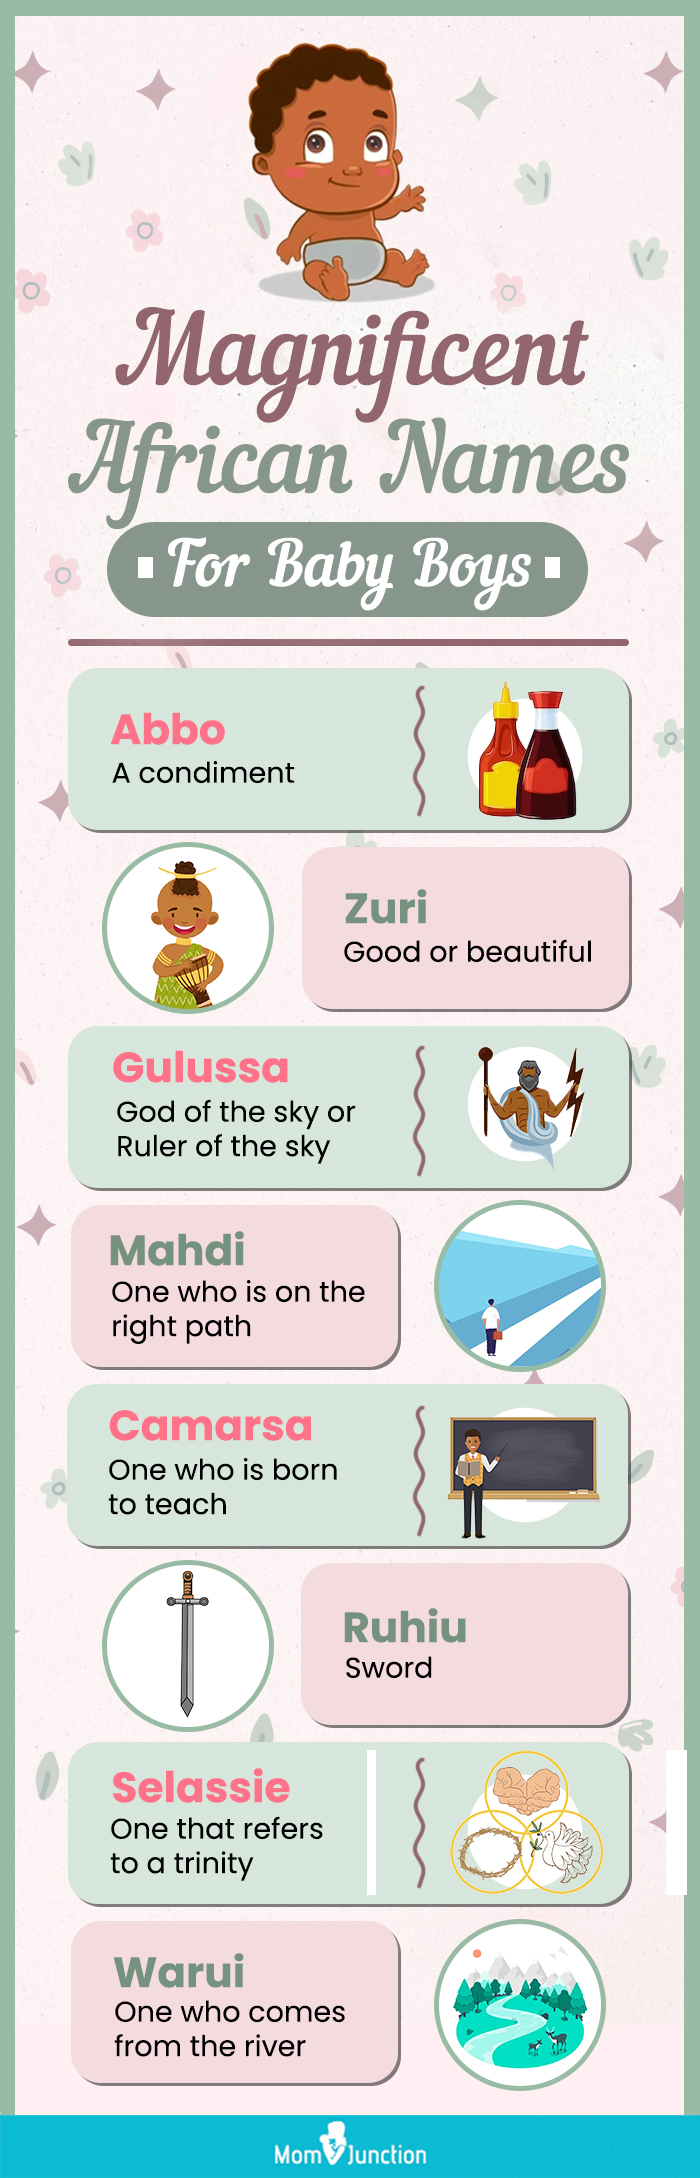 magnificent african names for baby boys (infographic)